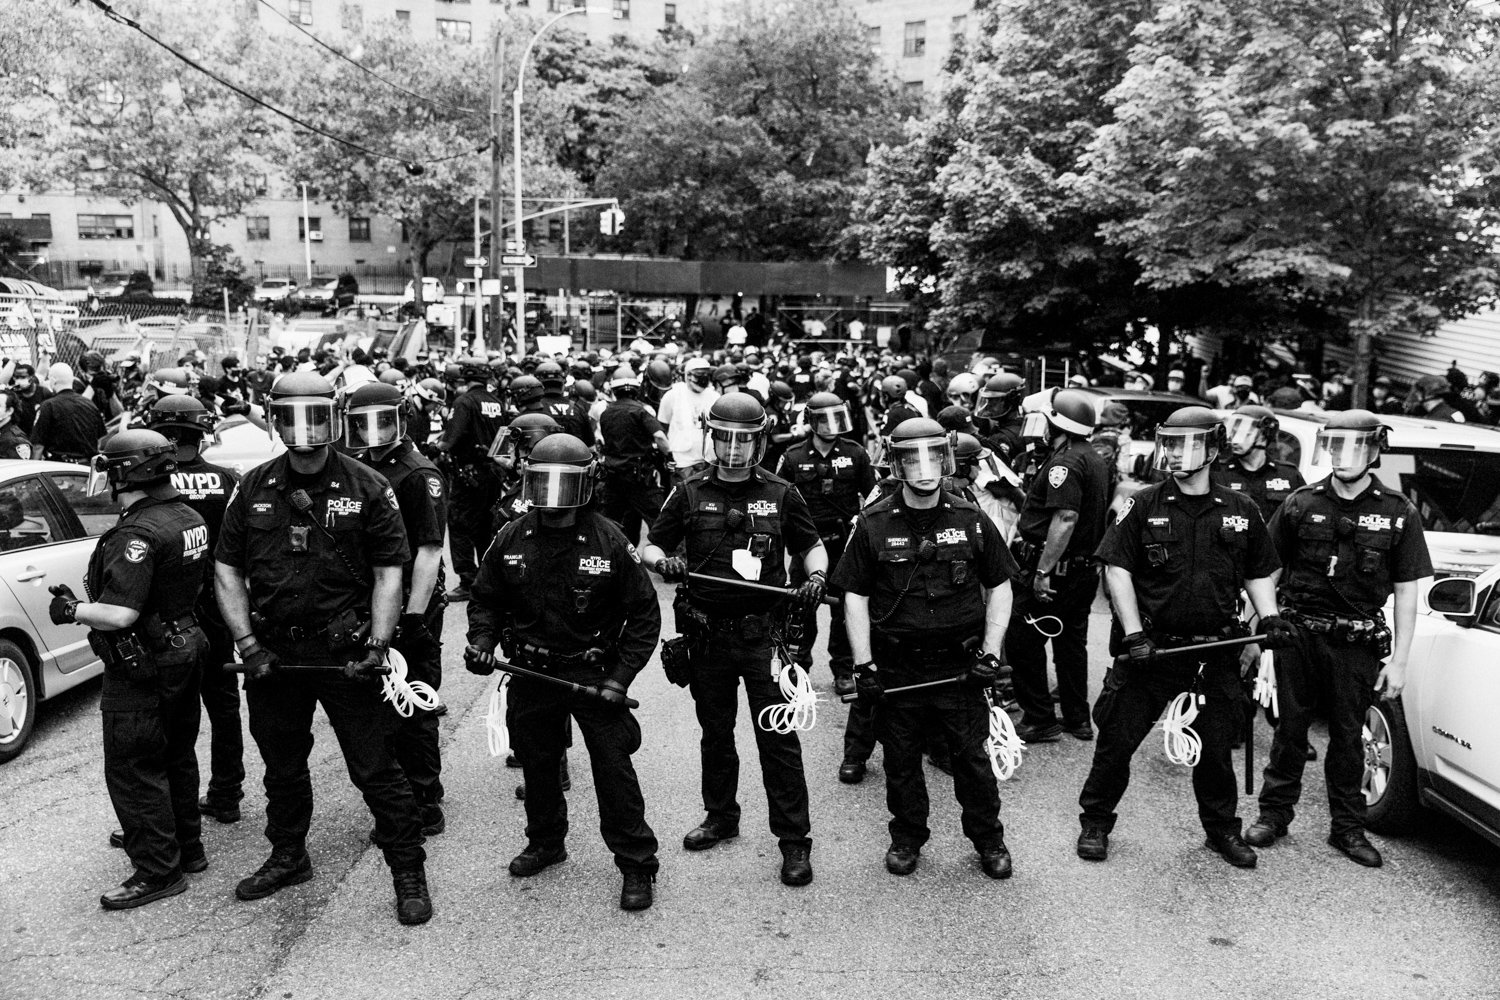 Police officers respond to protesters in Mott Haven on June 4 in the wake of the police-involved killing of George Floyd in Minneapolis in response to a protest. More than 100 protesters were arrested that night after reportedly being ‘kettled’ by police and finding themselves unable to get home as the 8 p.m., curfew took effect.